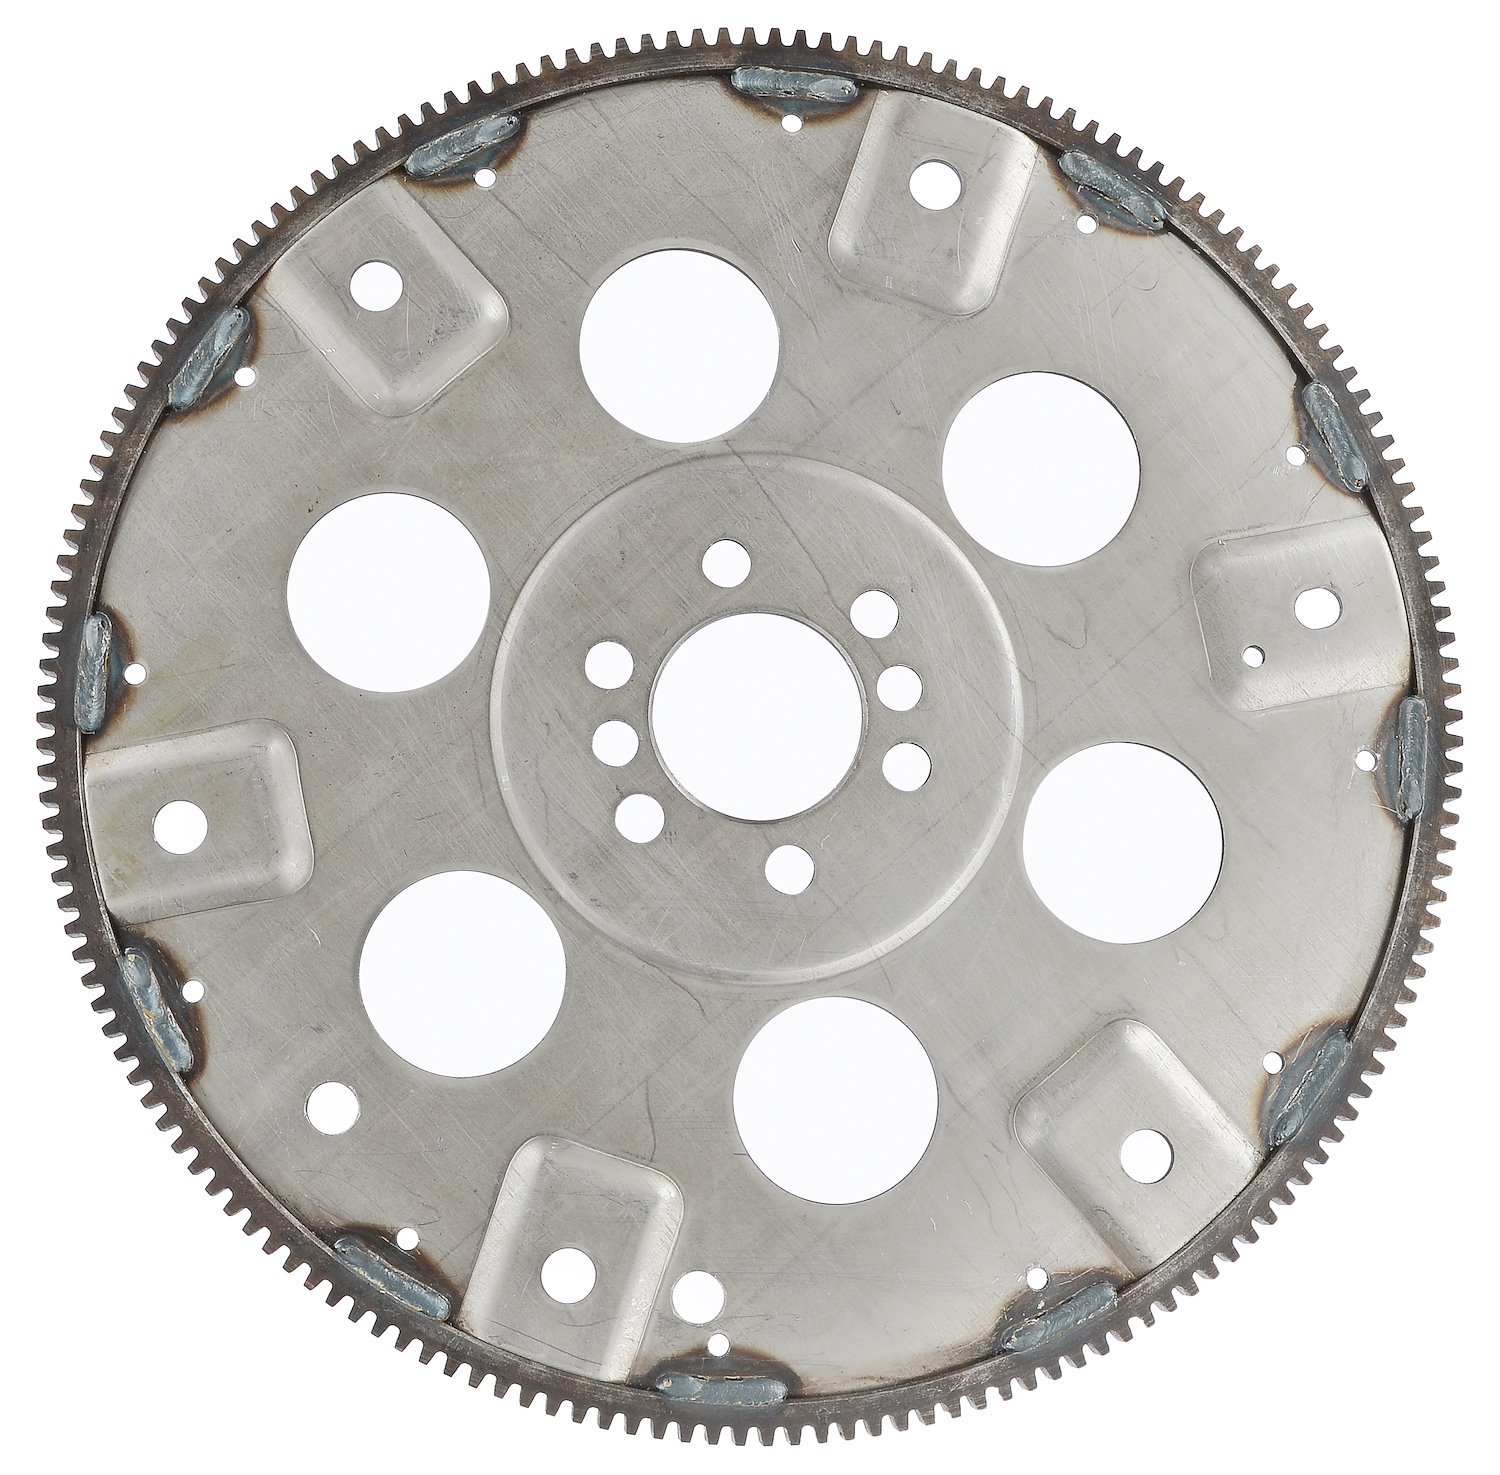 GM LS Flexplate For All 1999-2007 6.0L Engines with 4L80E Transmissions